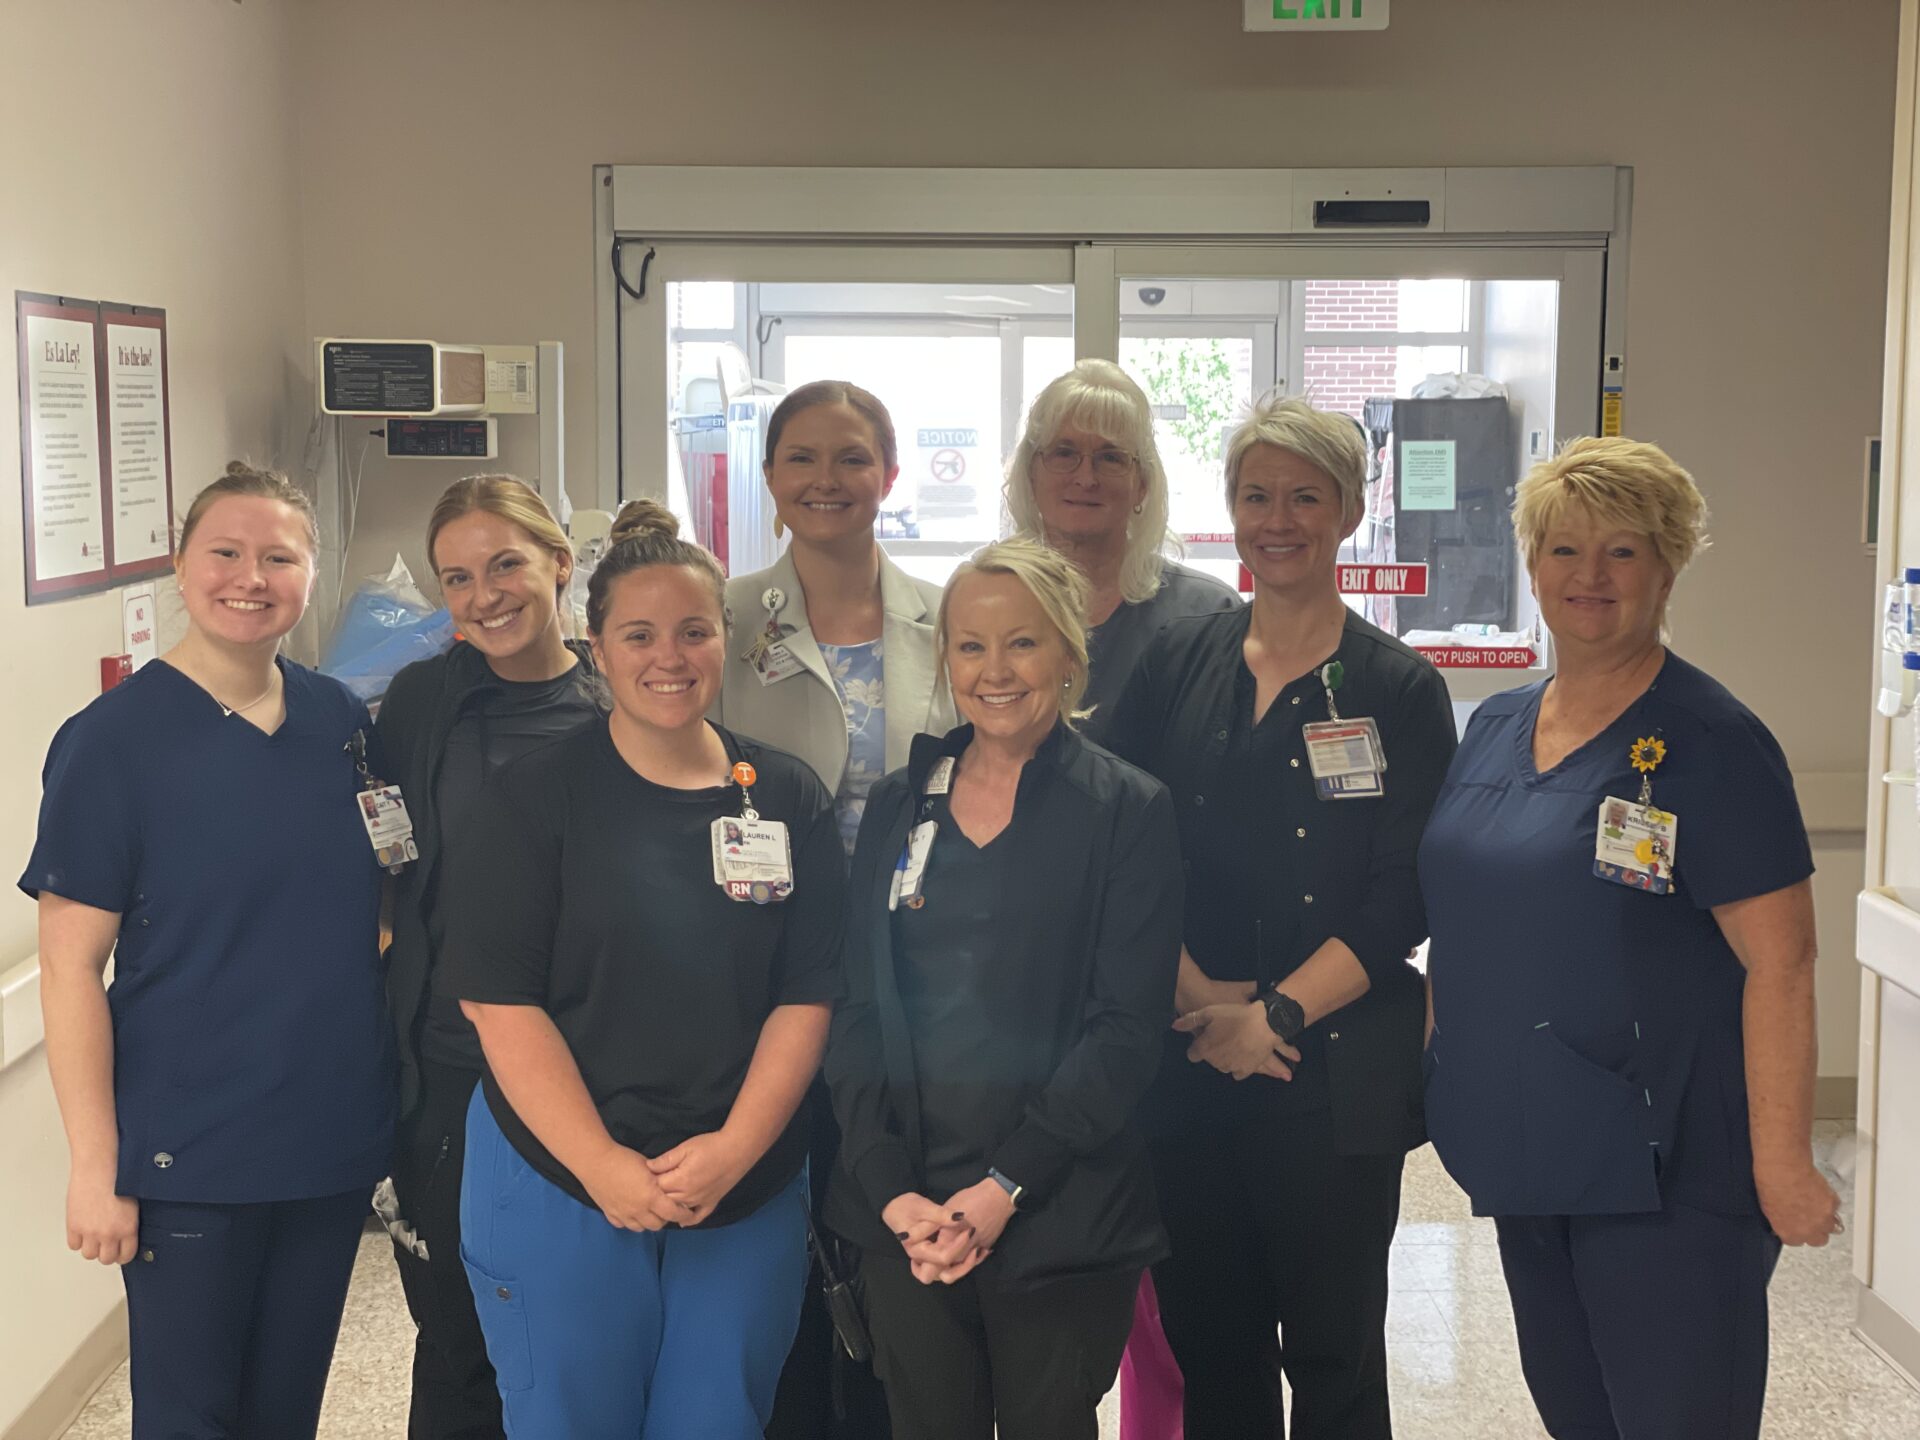 “Surrounded By Friends” – Couple Receives Excellent Care at Fort Loudoun Emergency Room